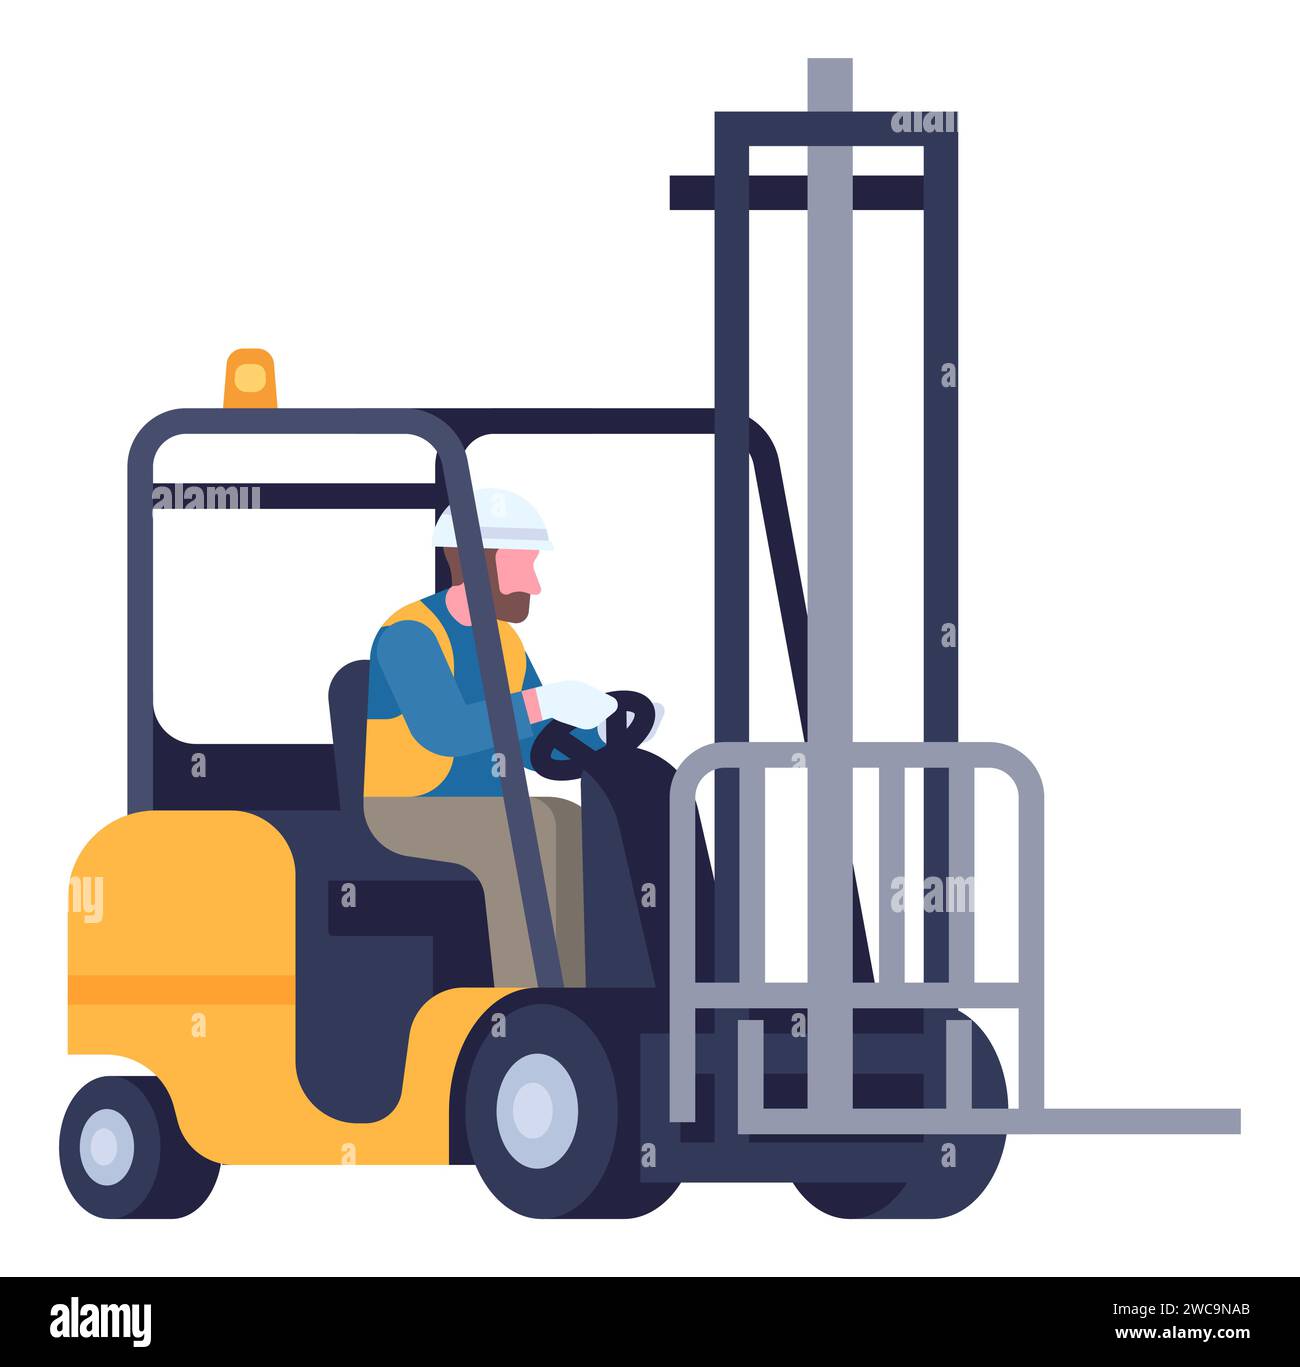 Cargo logistics. Freight lifting. Warehouse forklift. Boxes loading car. Workman driving vehicle. Driver at loader. Storehouse distribution machine Stock Vector